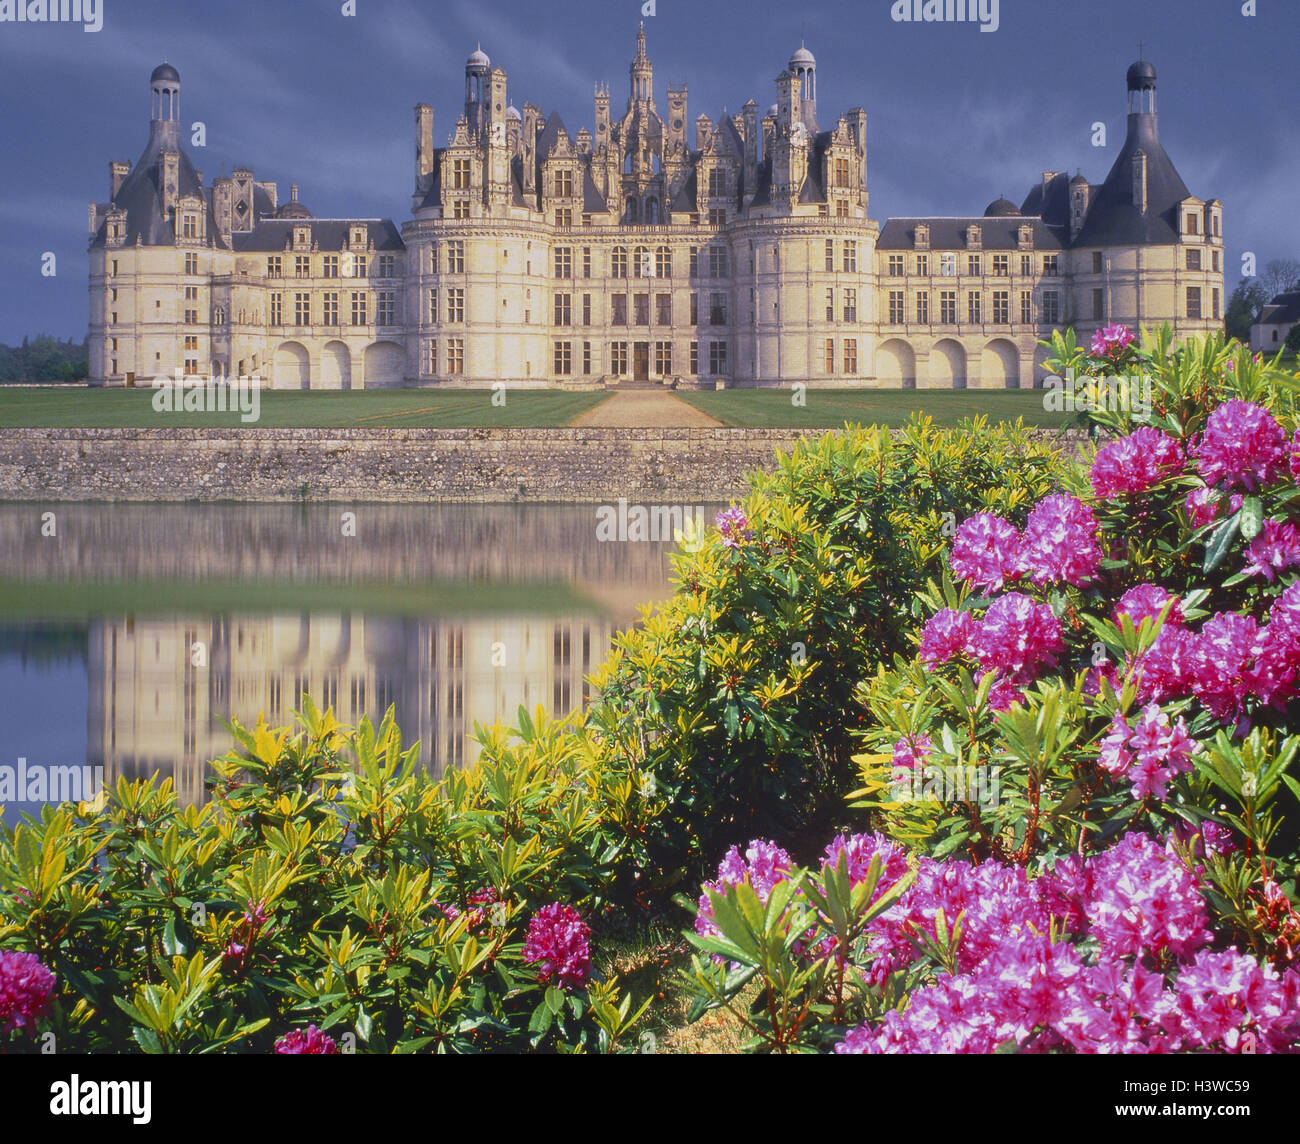 France, Loire valley, Chambord, lock, rhododendron, blossoms [M], Europe, Western, Europe, Loire lock, river, waters, structure, architecture, 16. Jh, UNESCO-world cultural heritage, architecture, place of interest, park, summer, outside Stock Photo